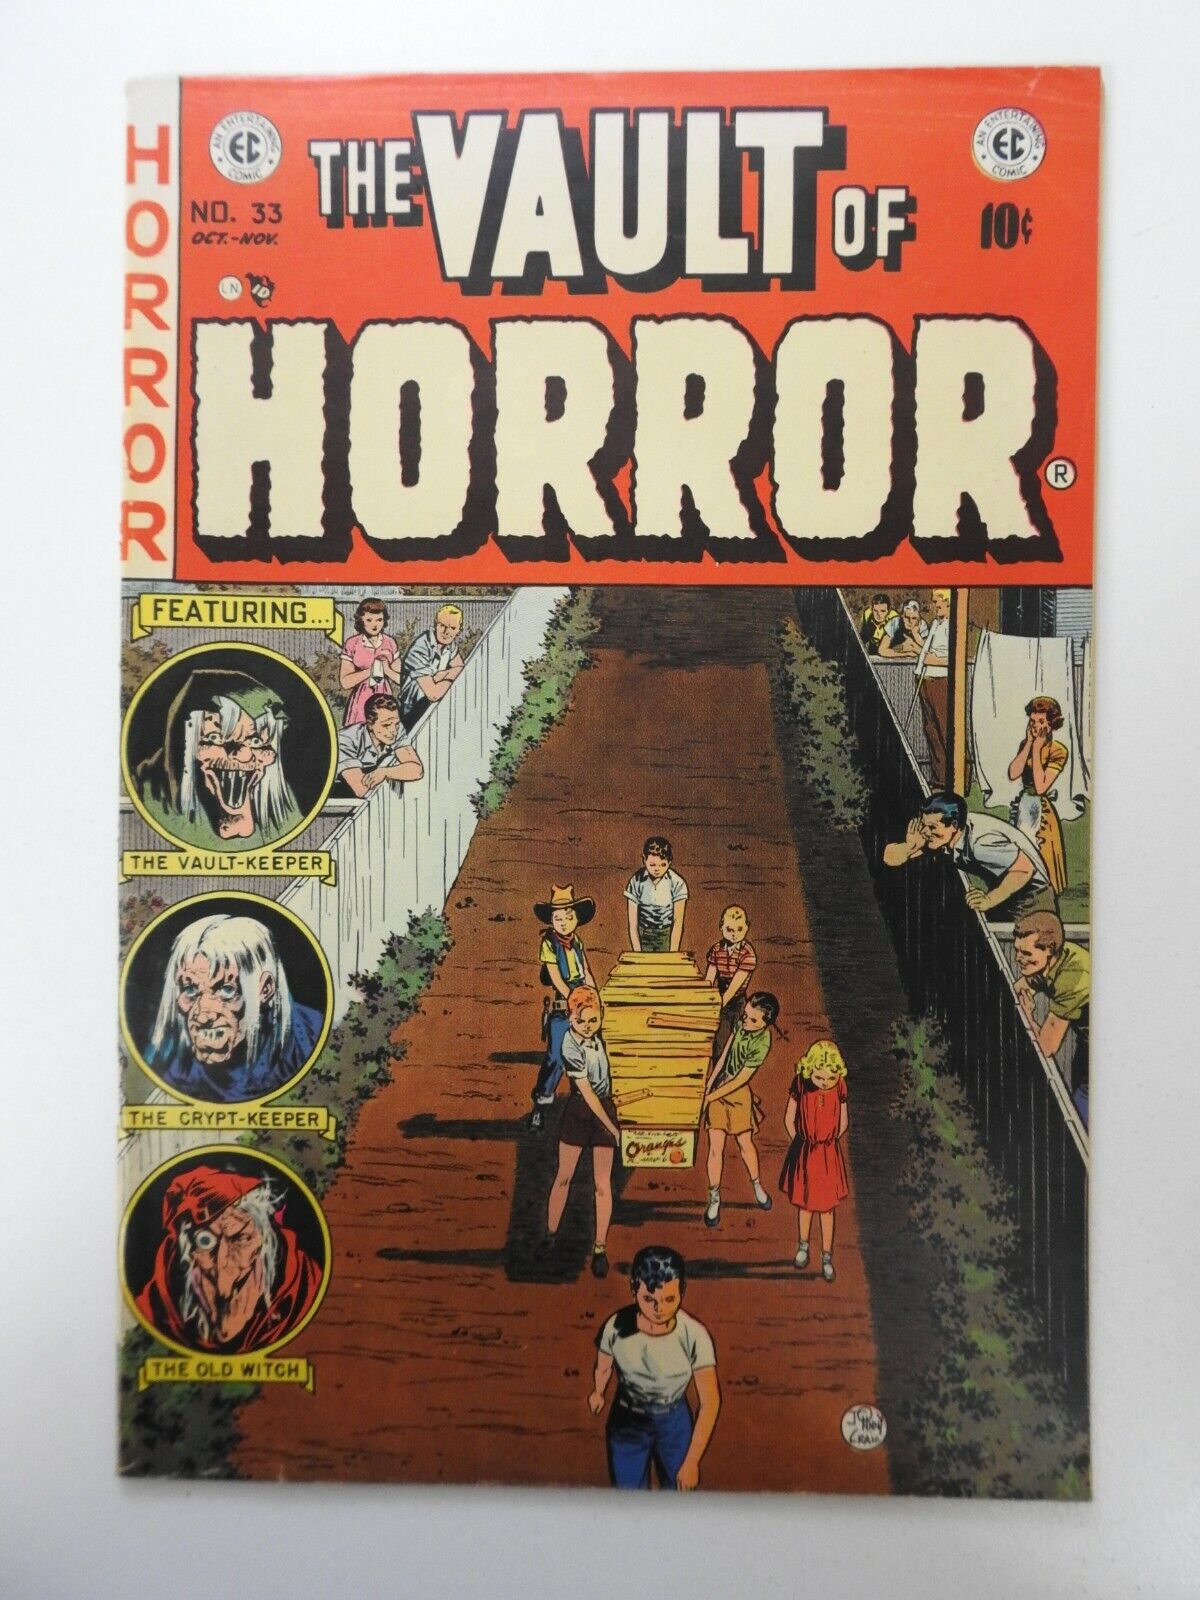 The Vault of Horror #33 VG+ condition Pre-Code Horror